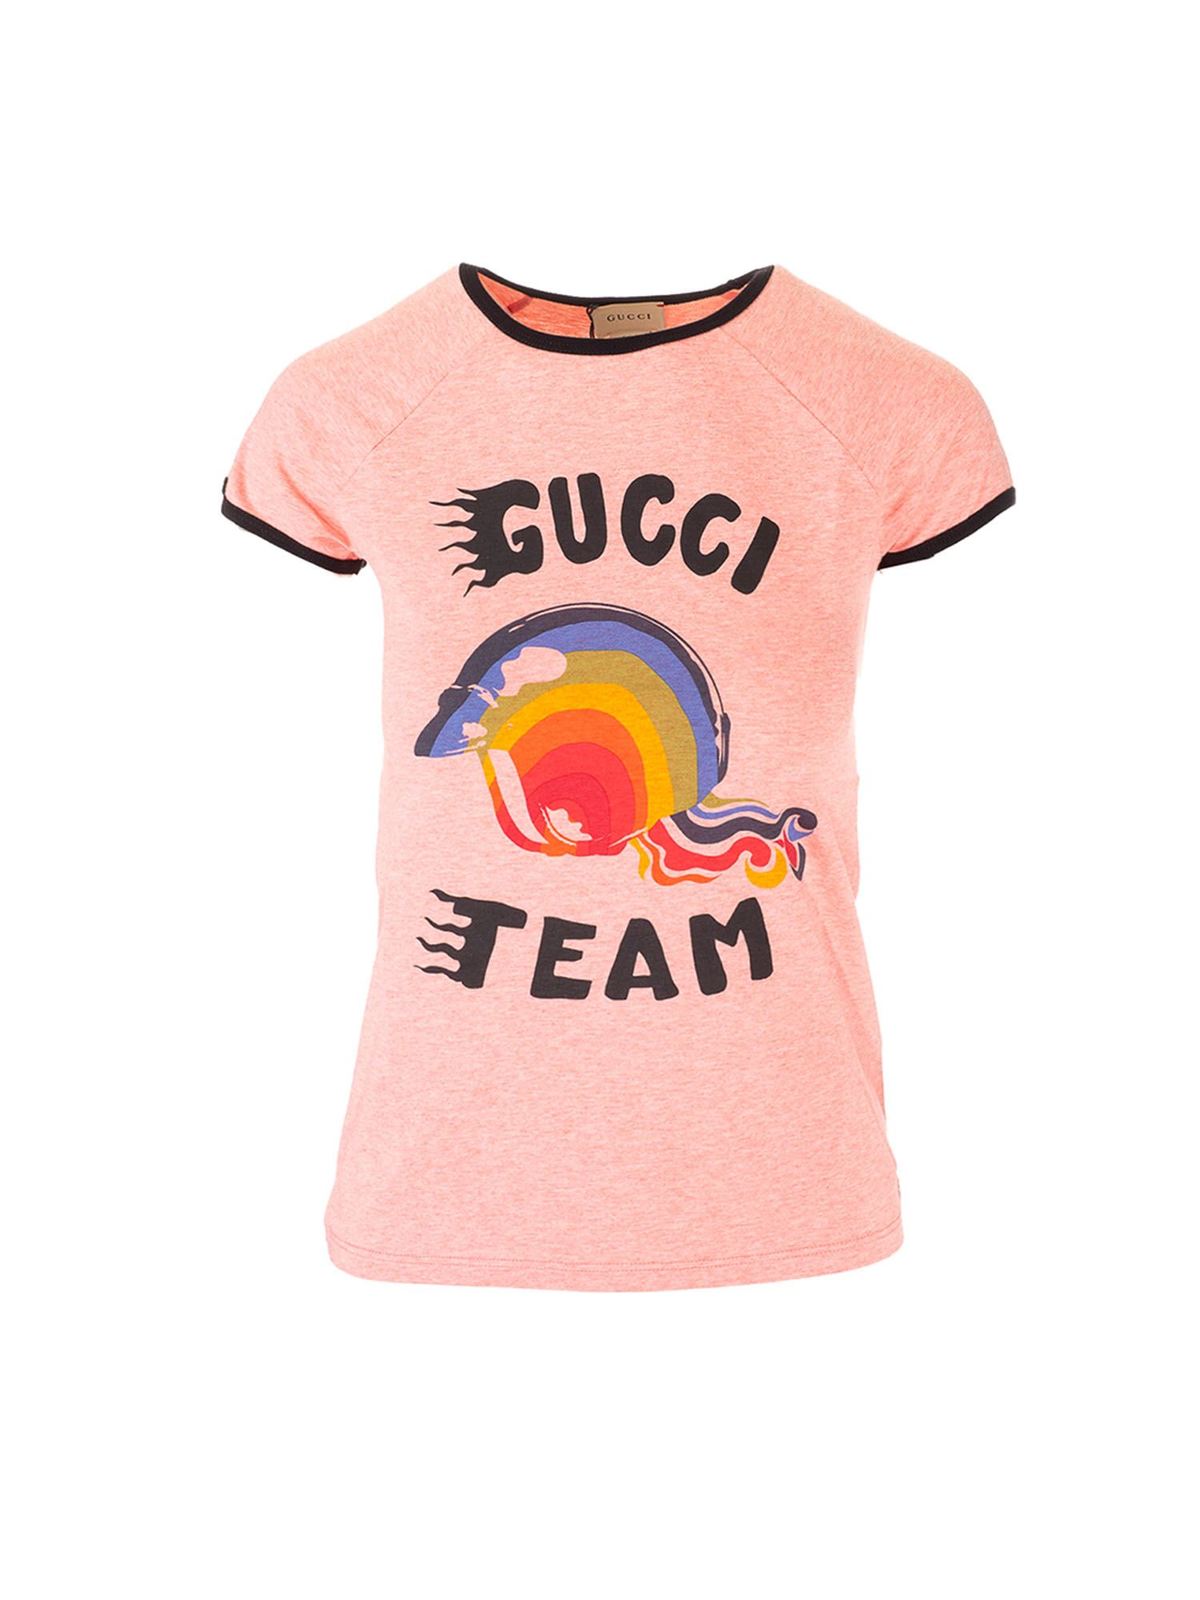 Gucci GUCCI TEAM T-SHIRT IN PINK